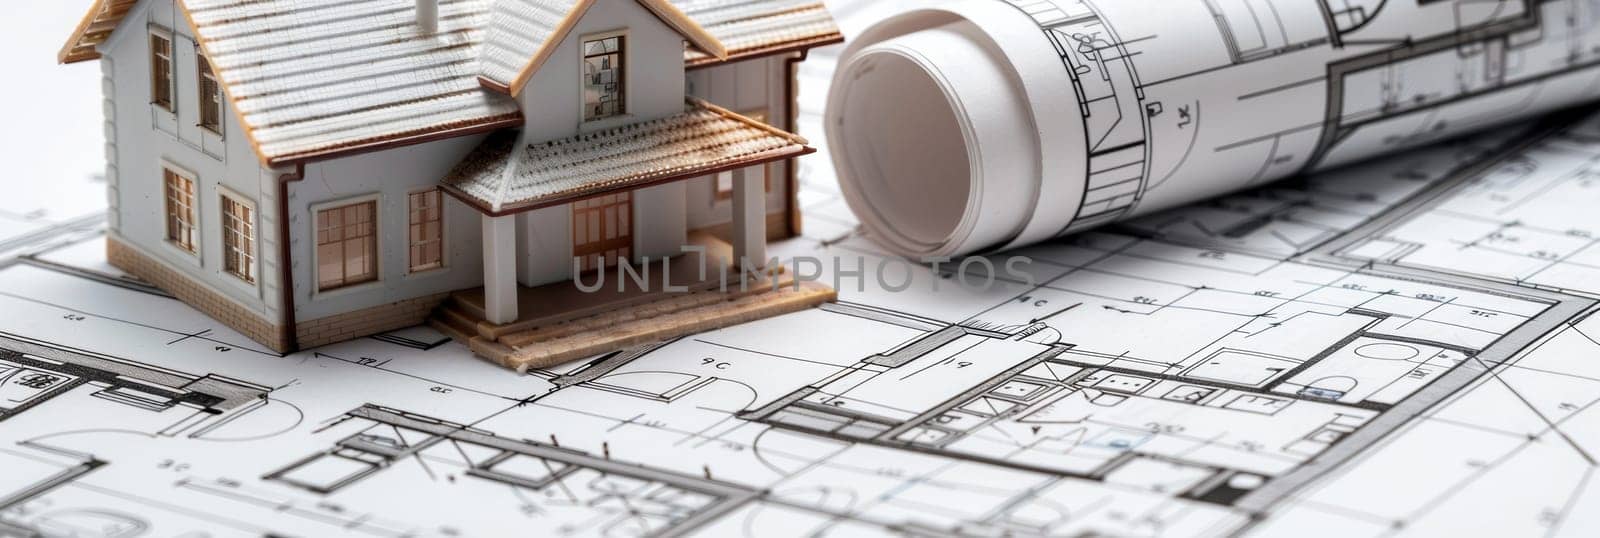 A model house sits proudly on top of a detailed blueprint, symbolizing the beginning of a new construction project filled with creative design and planning.